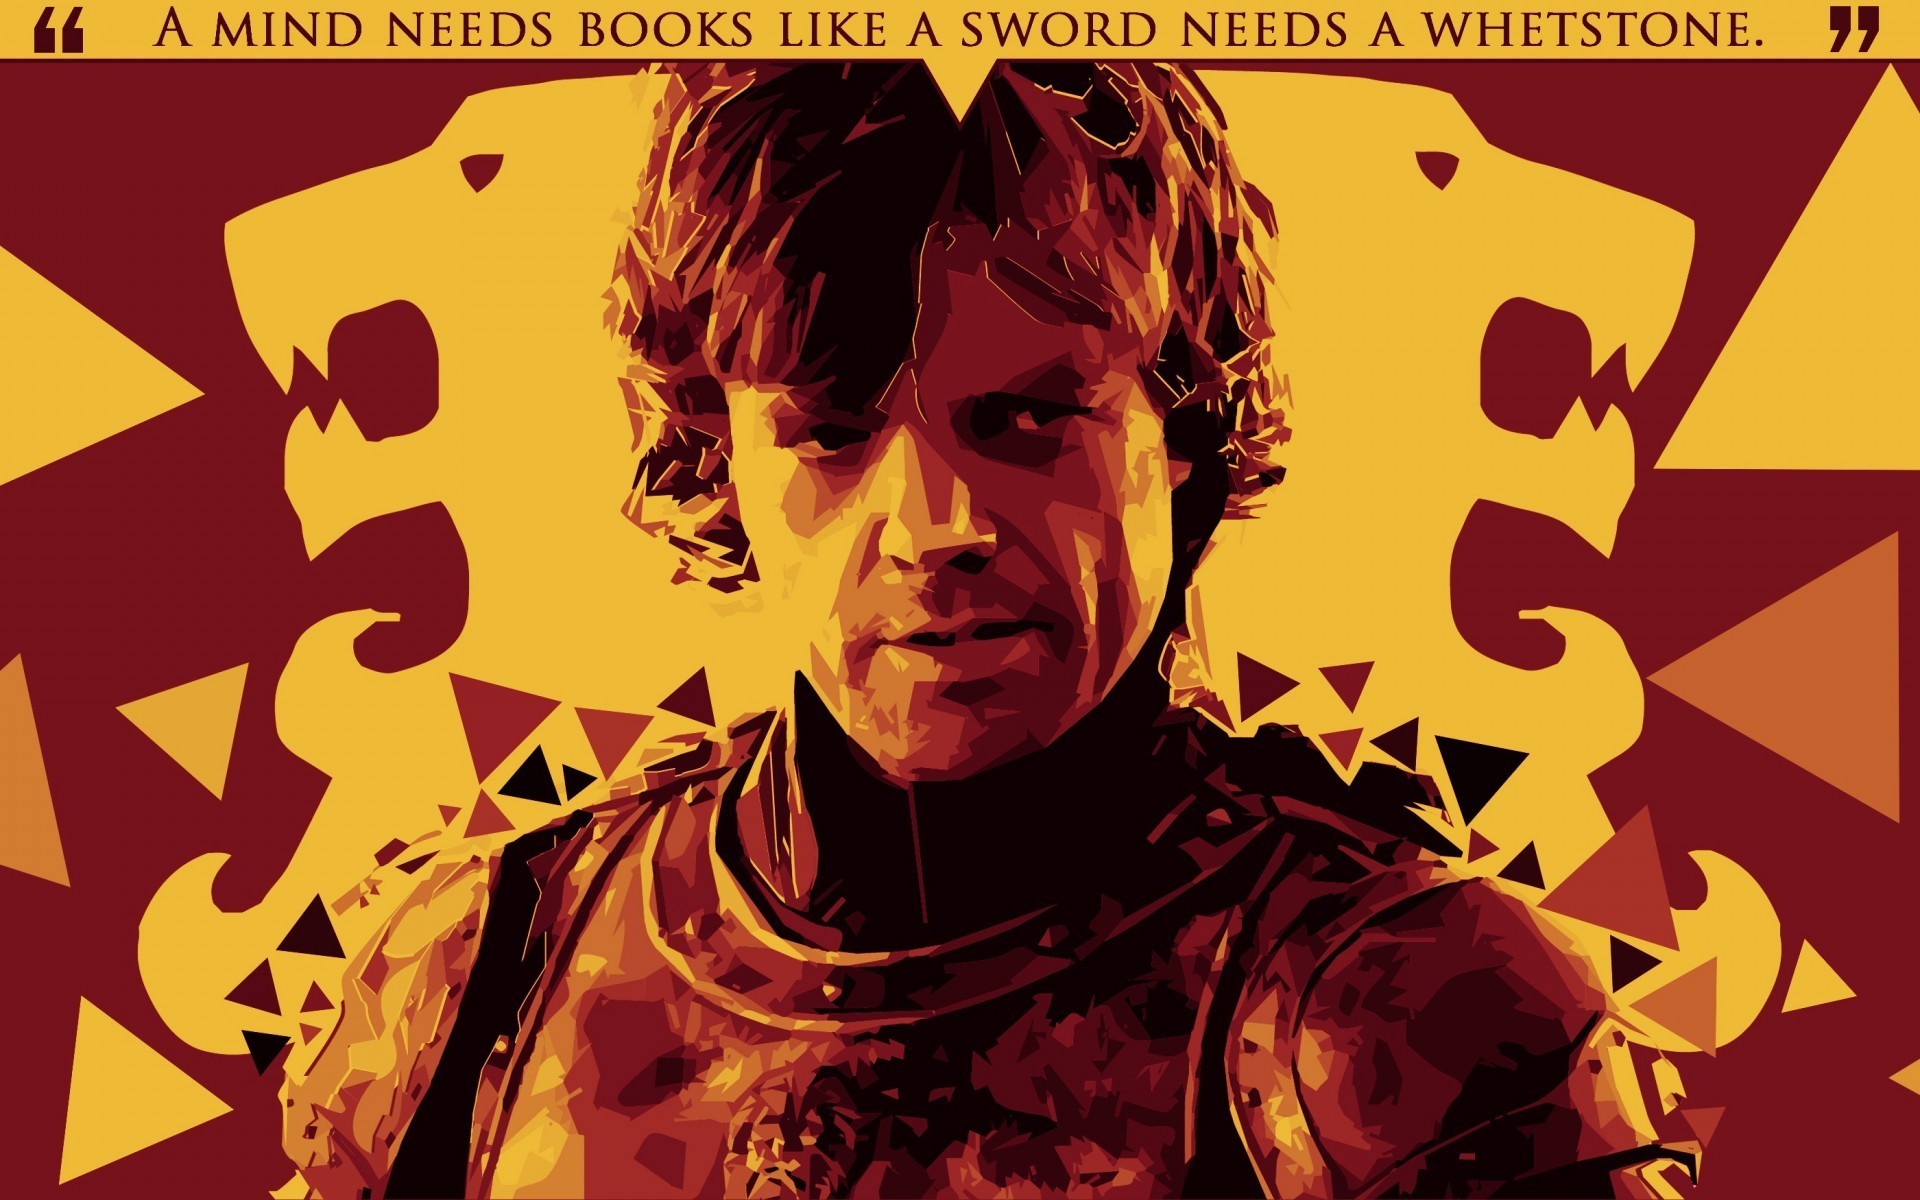 General 1920x1200 Game of Thrones Tyrion Lannister TV series digital art text quote